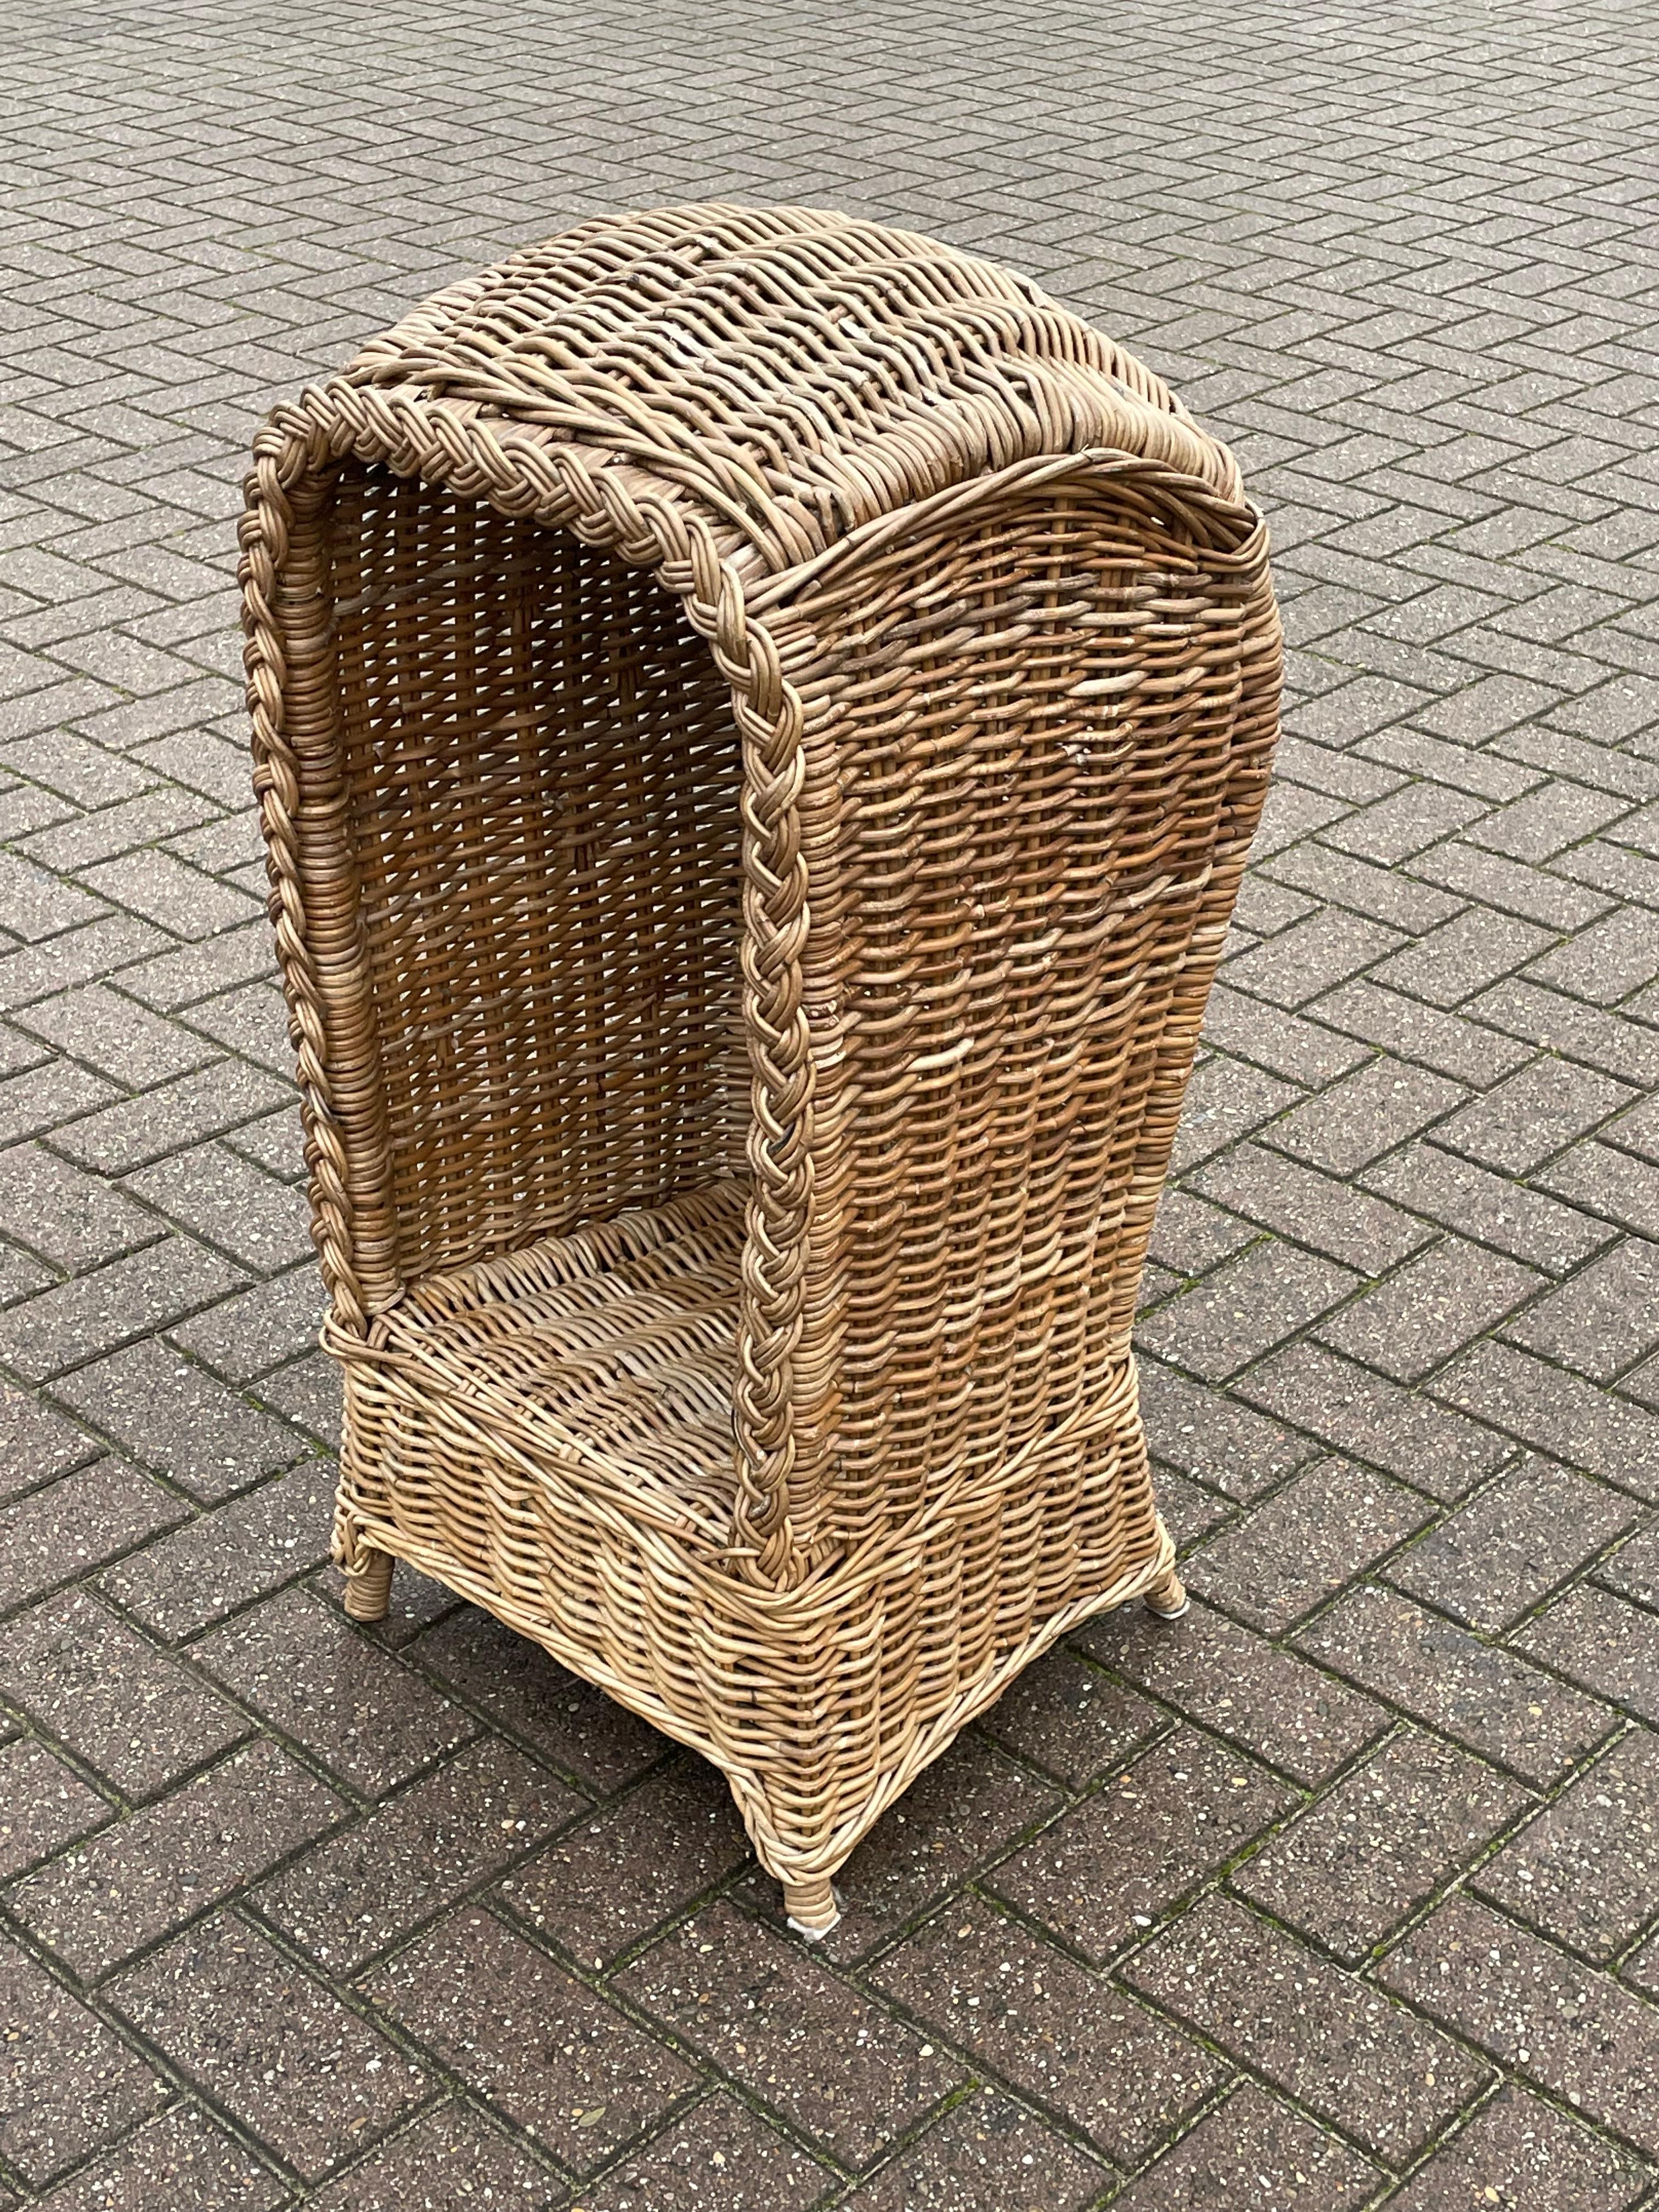 antique woven chairs